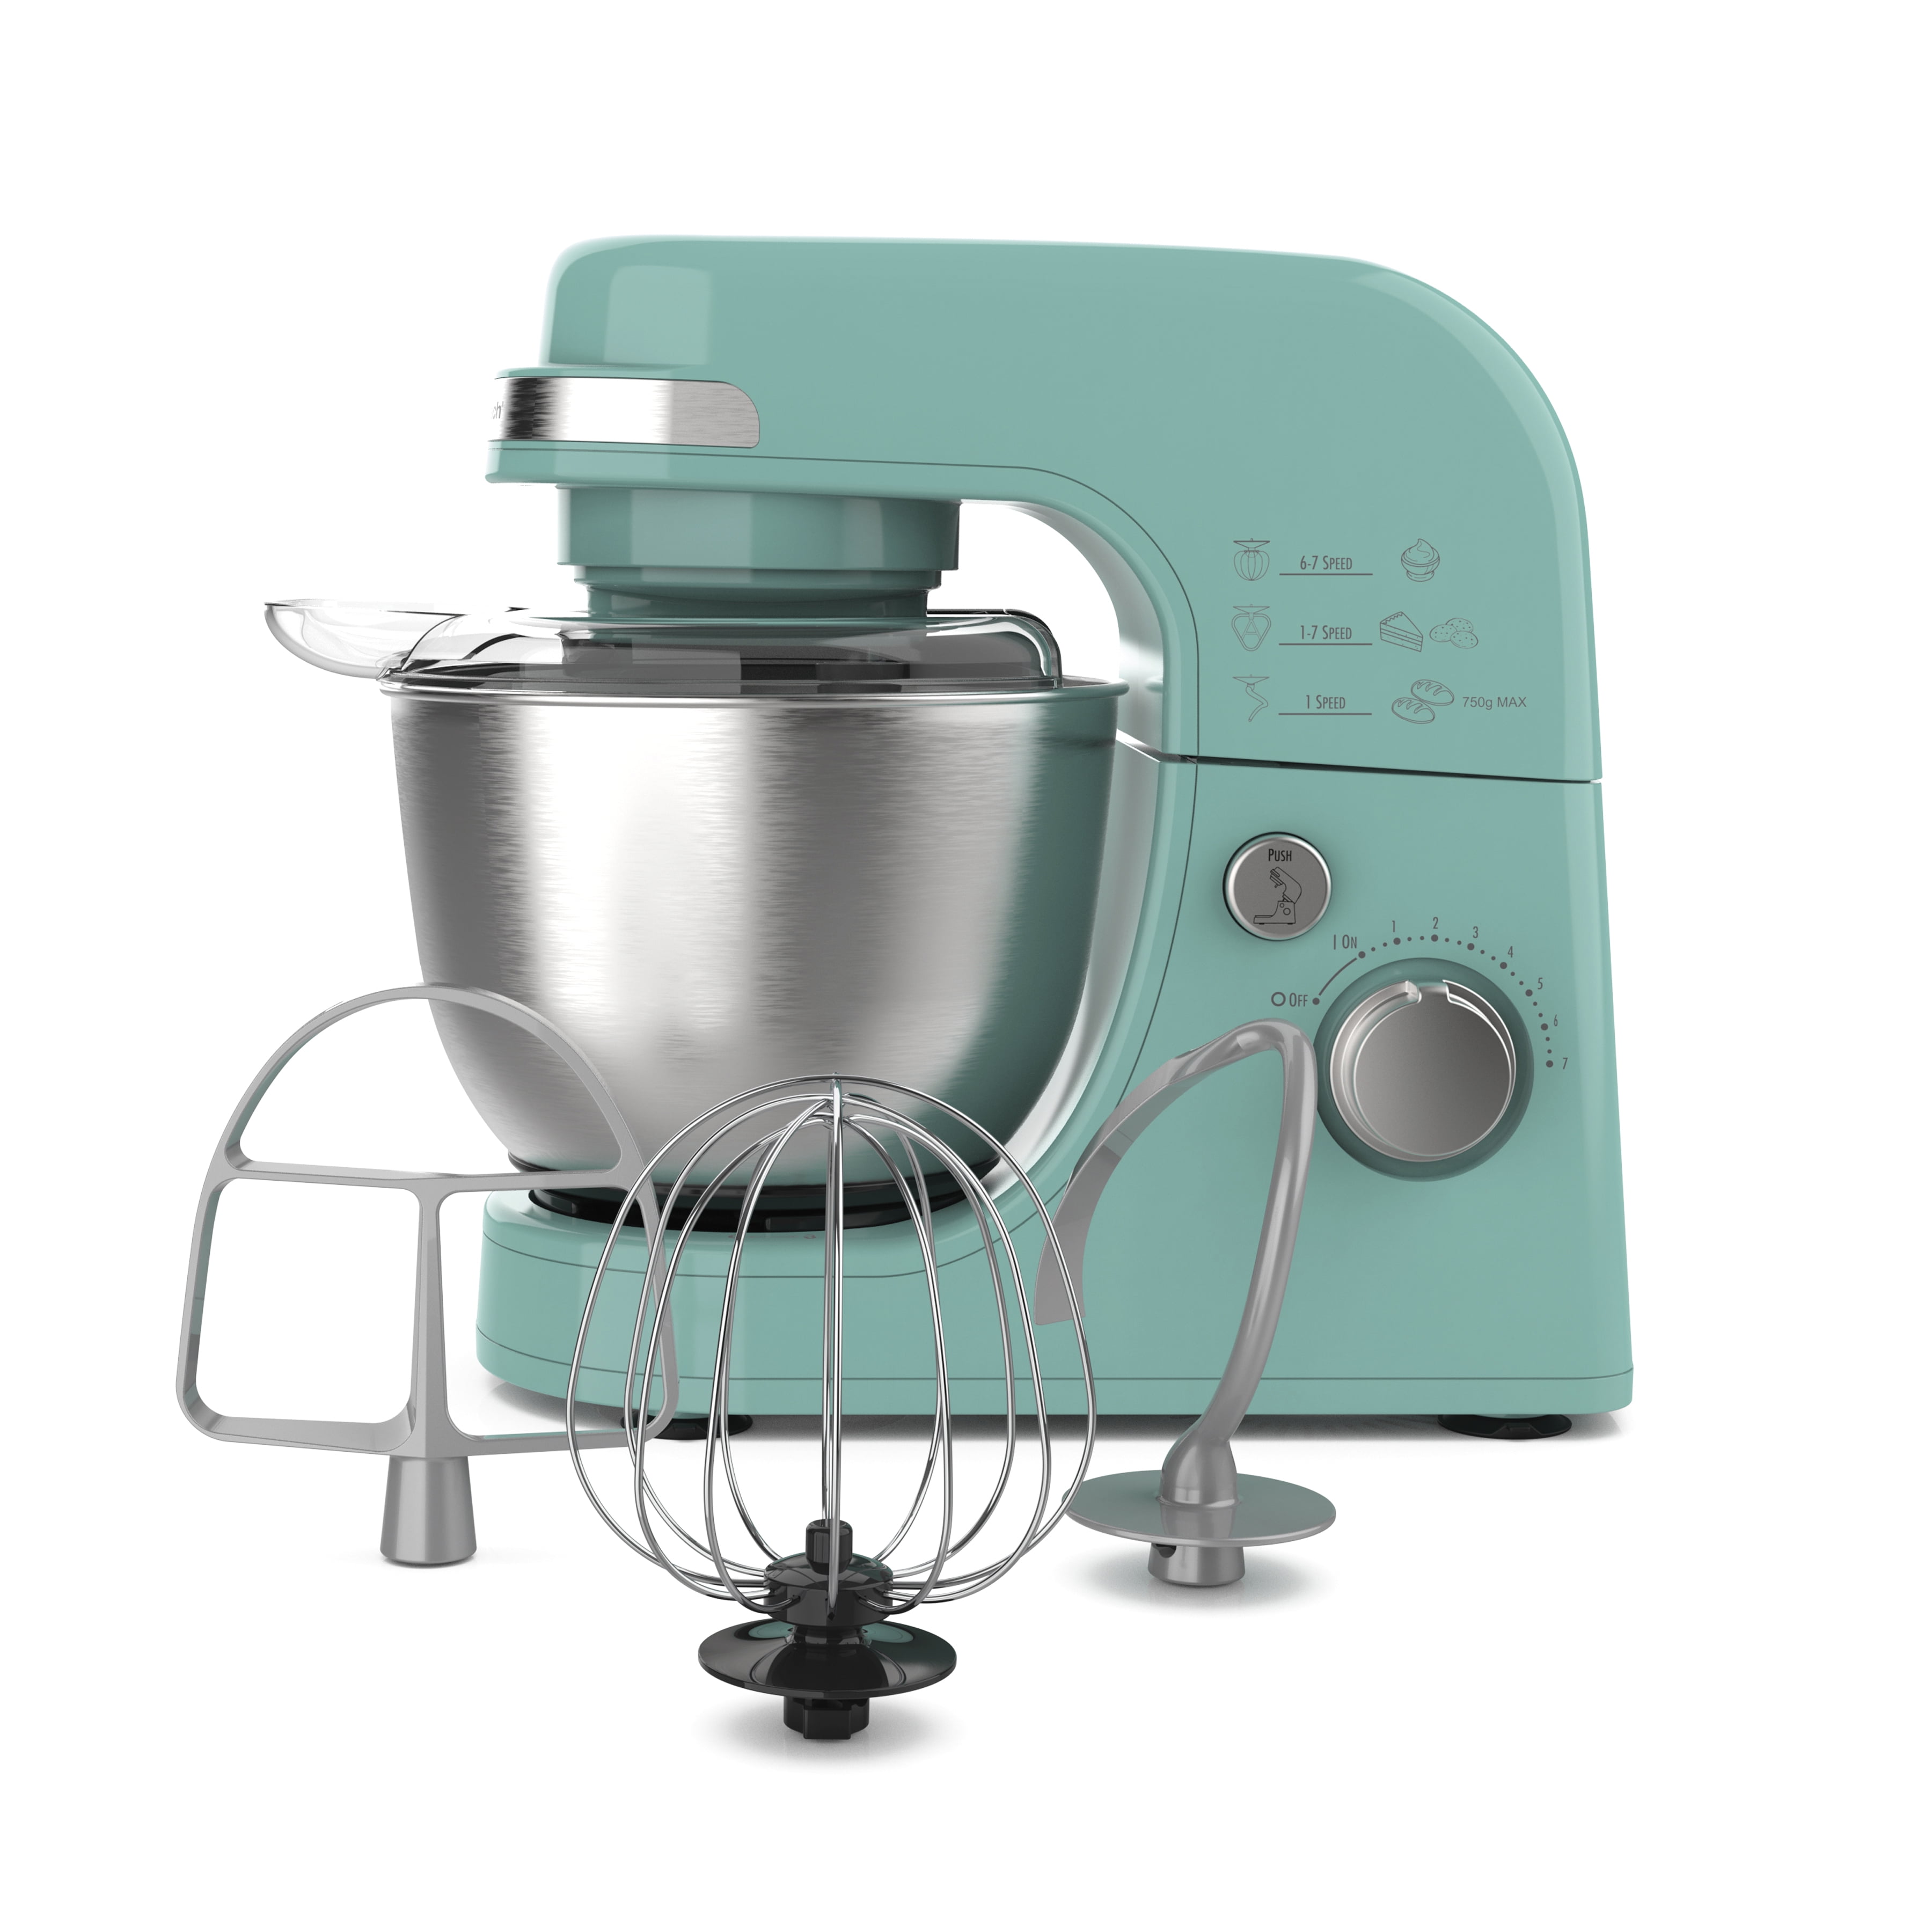 Hamilton Beach Turquoise Milkshake Drink Master or Mixer with Stainless  Steel Cup, Mint Aqua 2 speeds